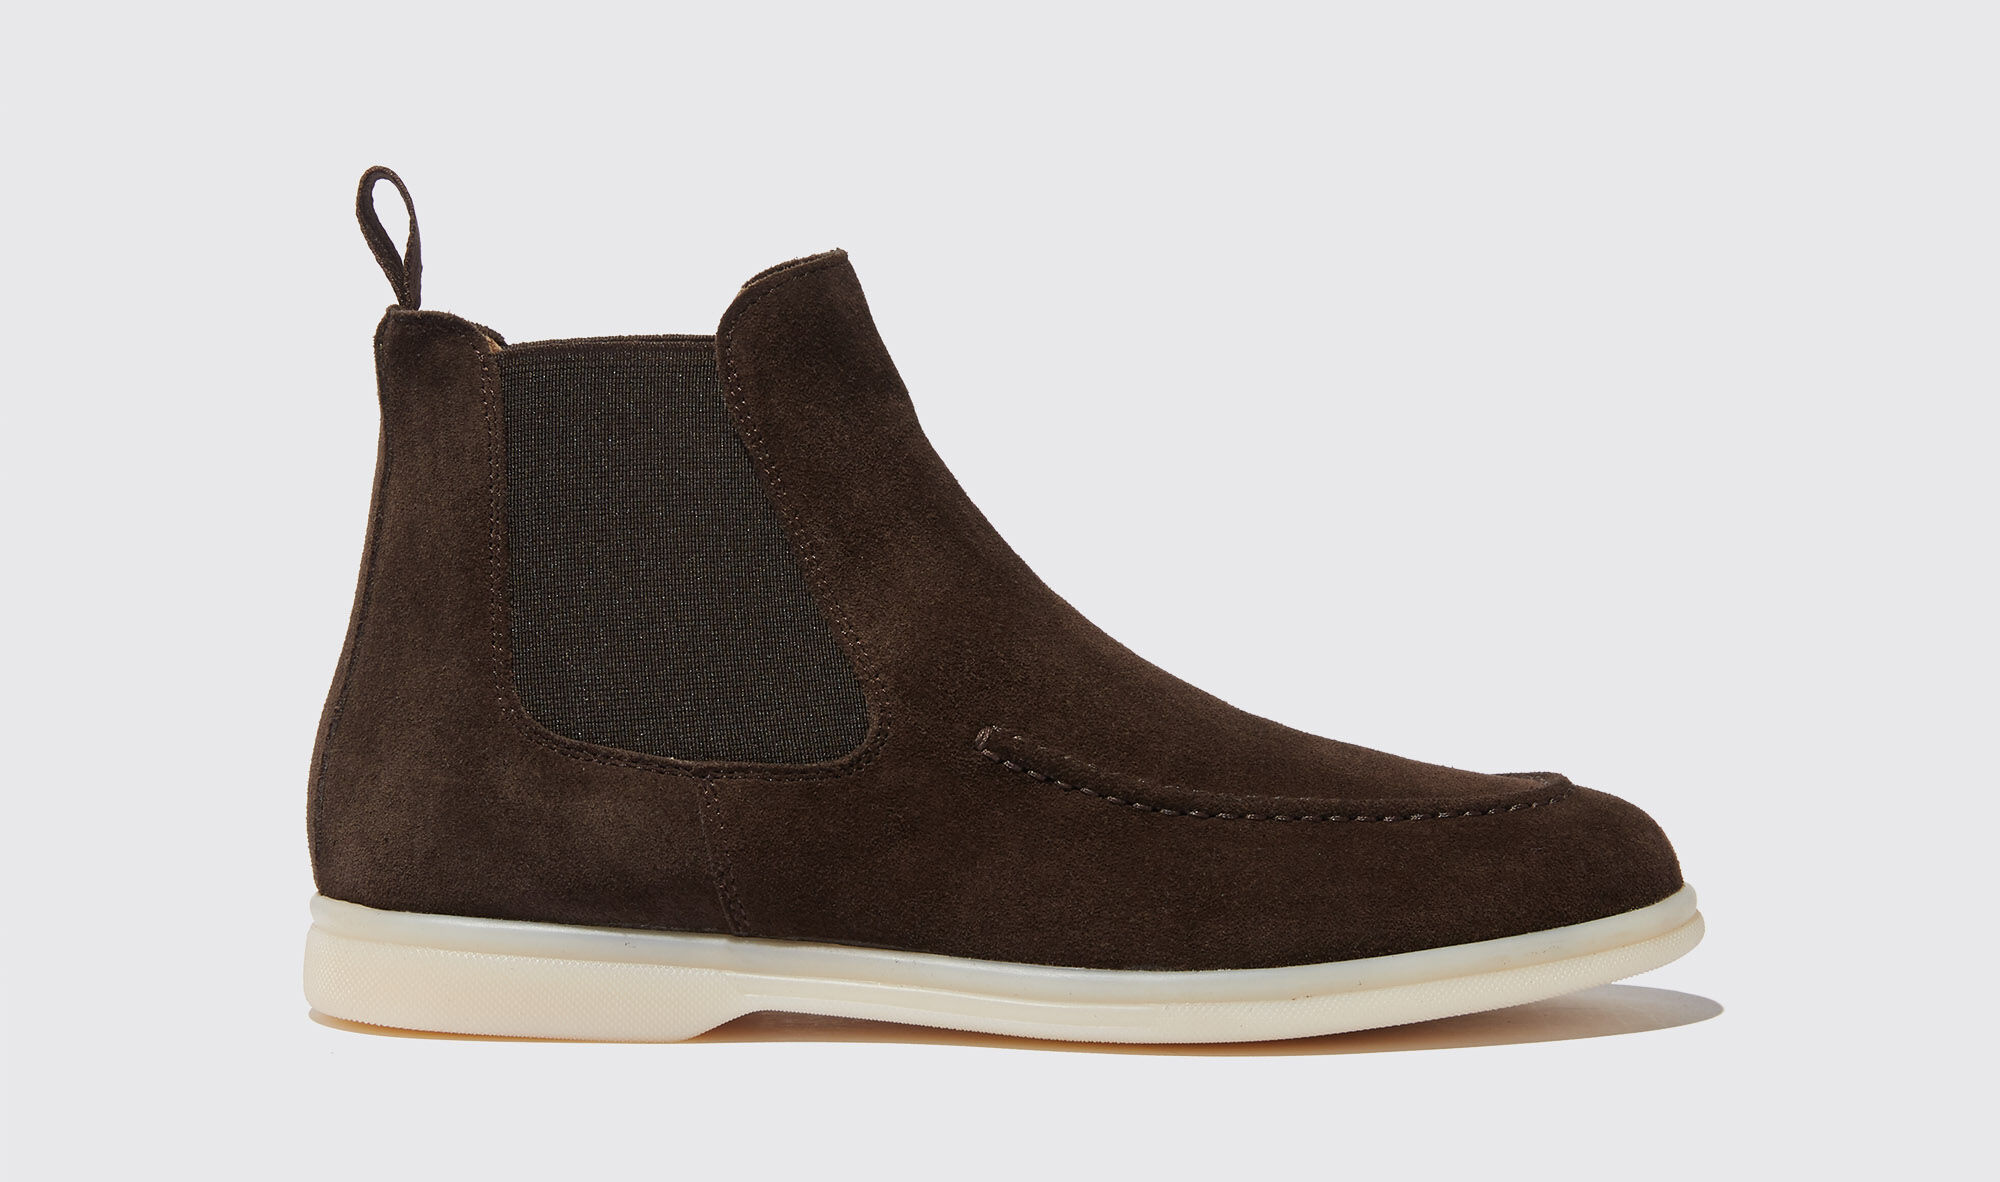 Scarosso Eugenia Moro Scamosciata - Donna Chelsea Boots Brown - Suede Leather 35